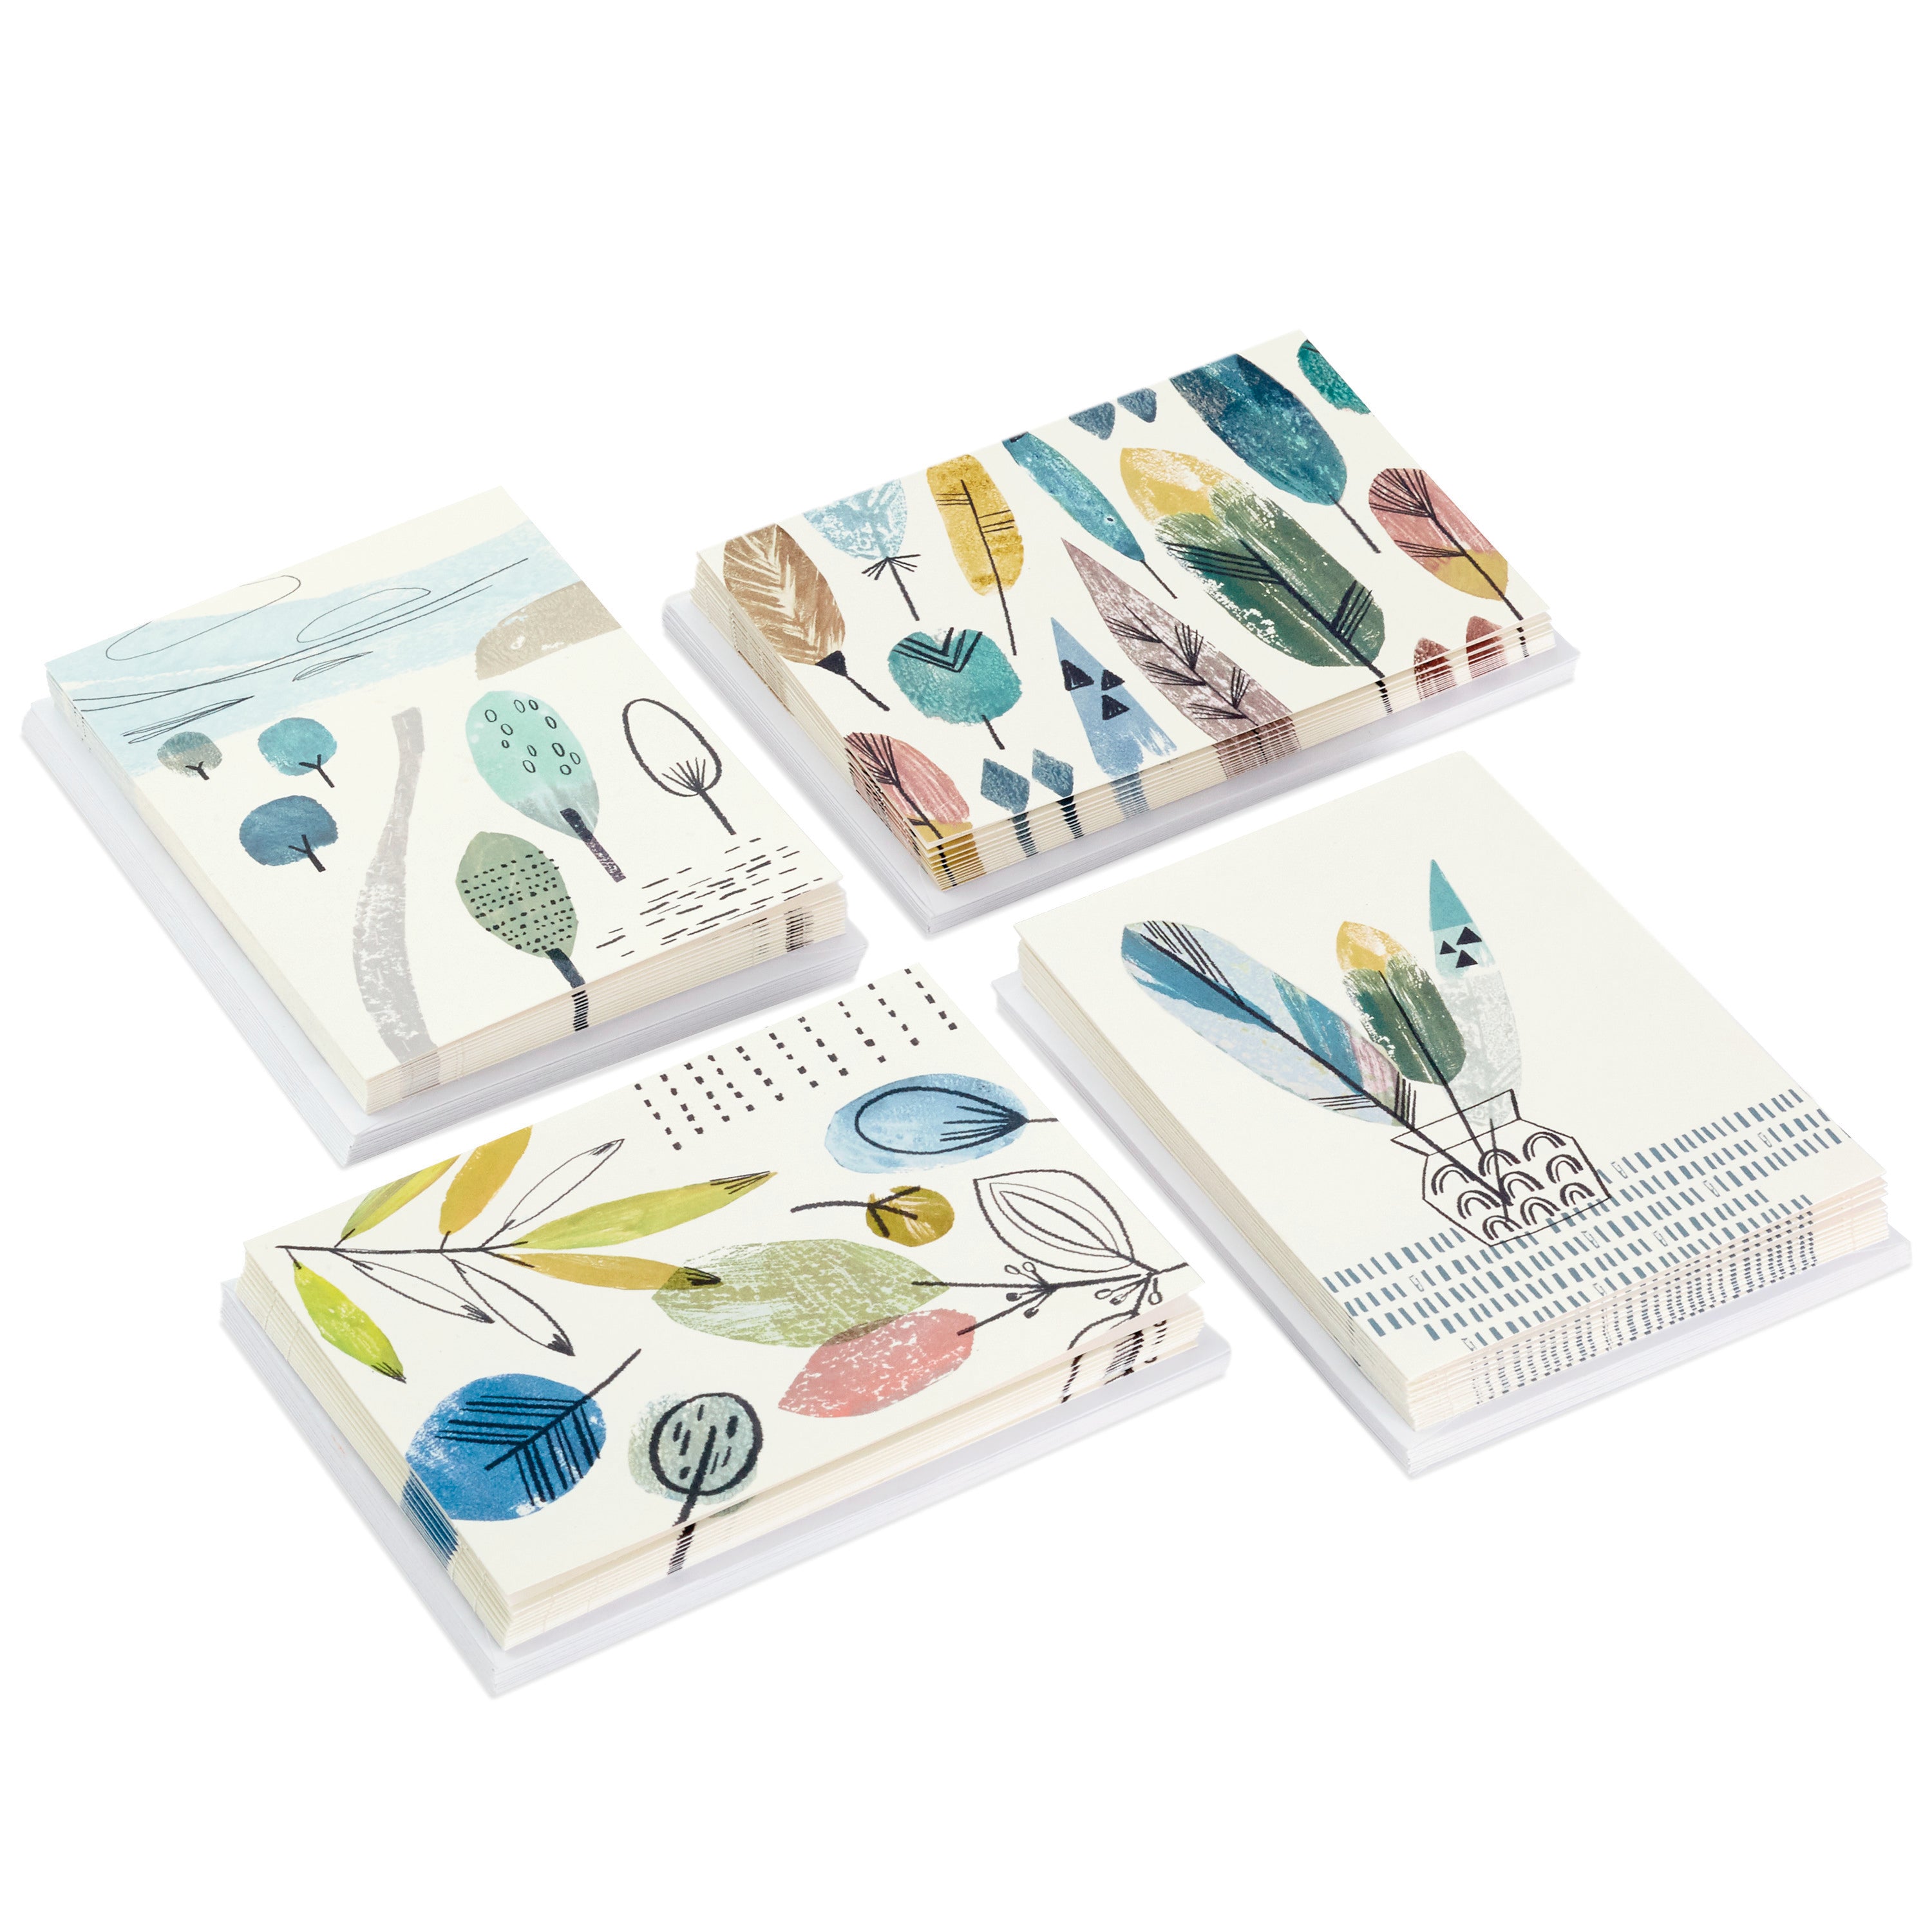 Blank Cards Assortment, Nature Prints (48 Cards with Envelopes)